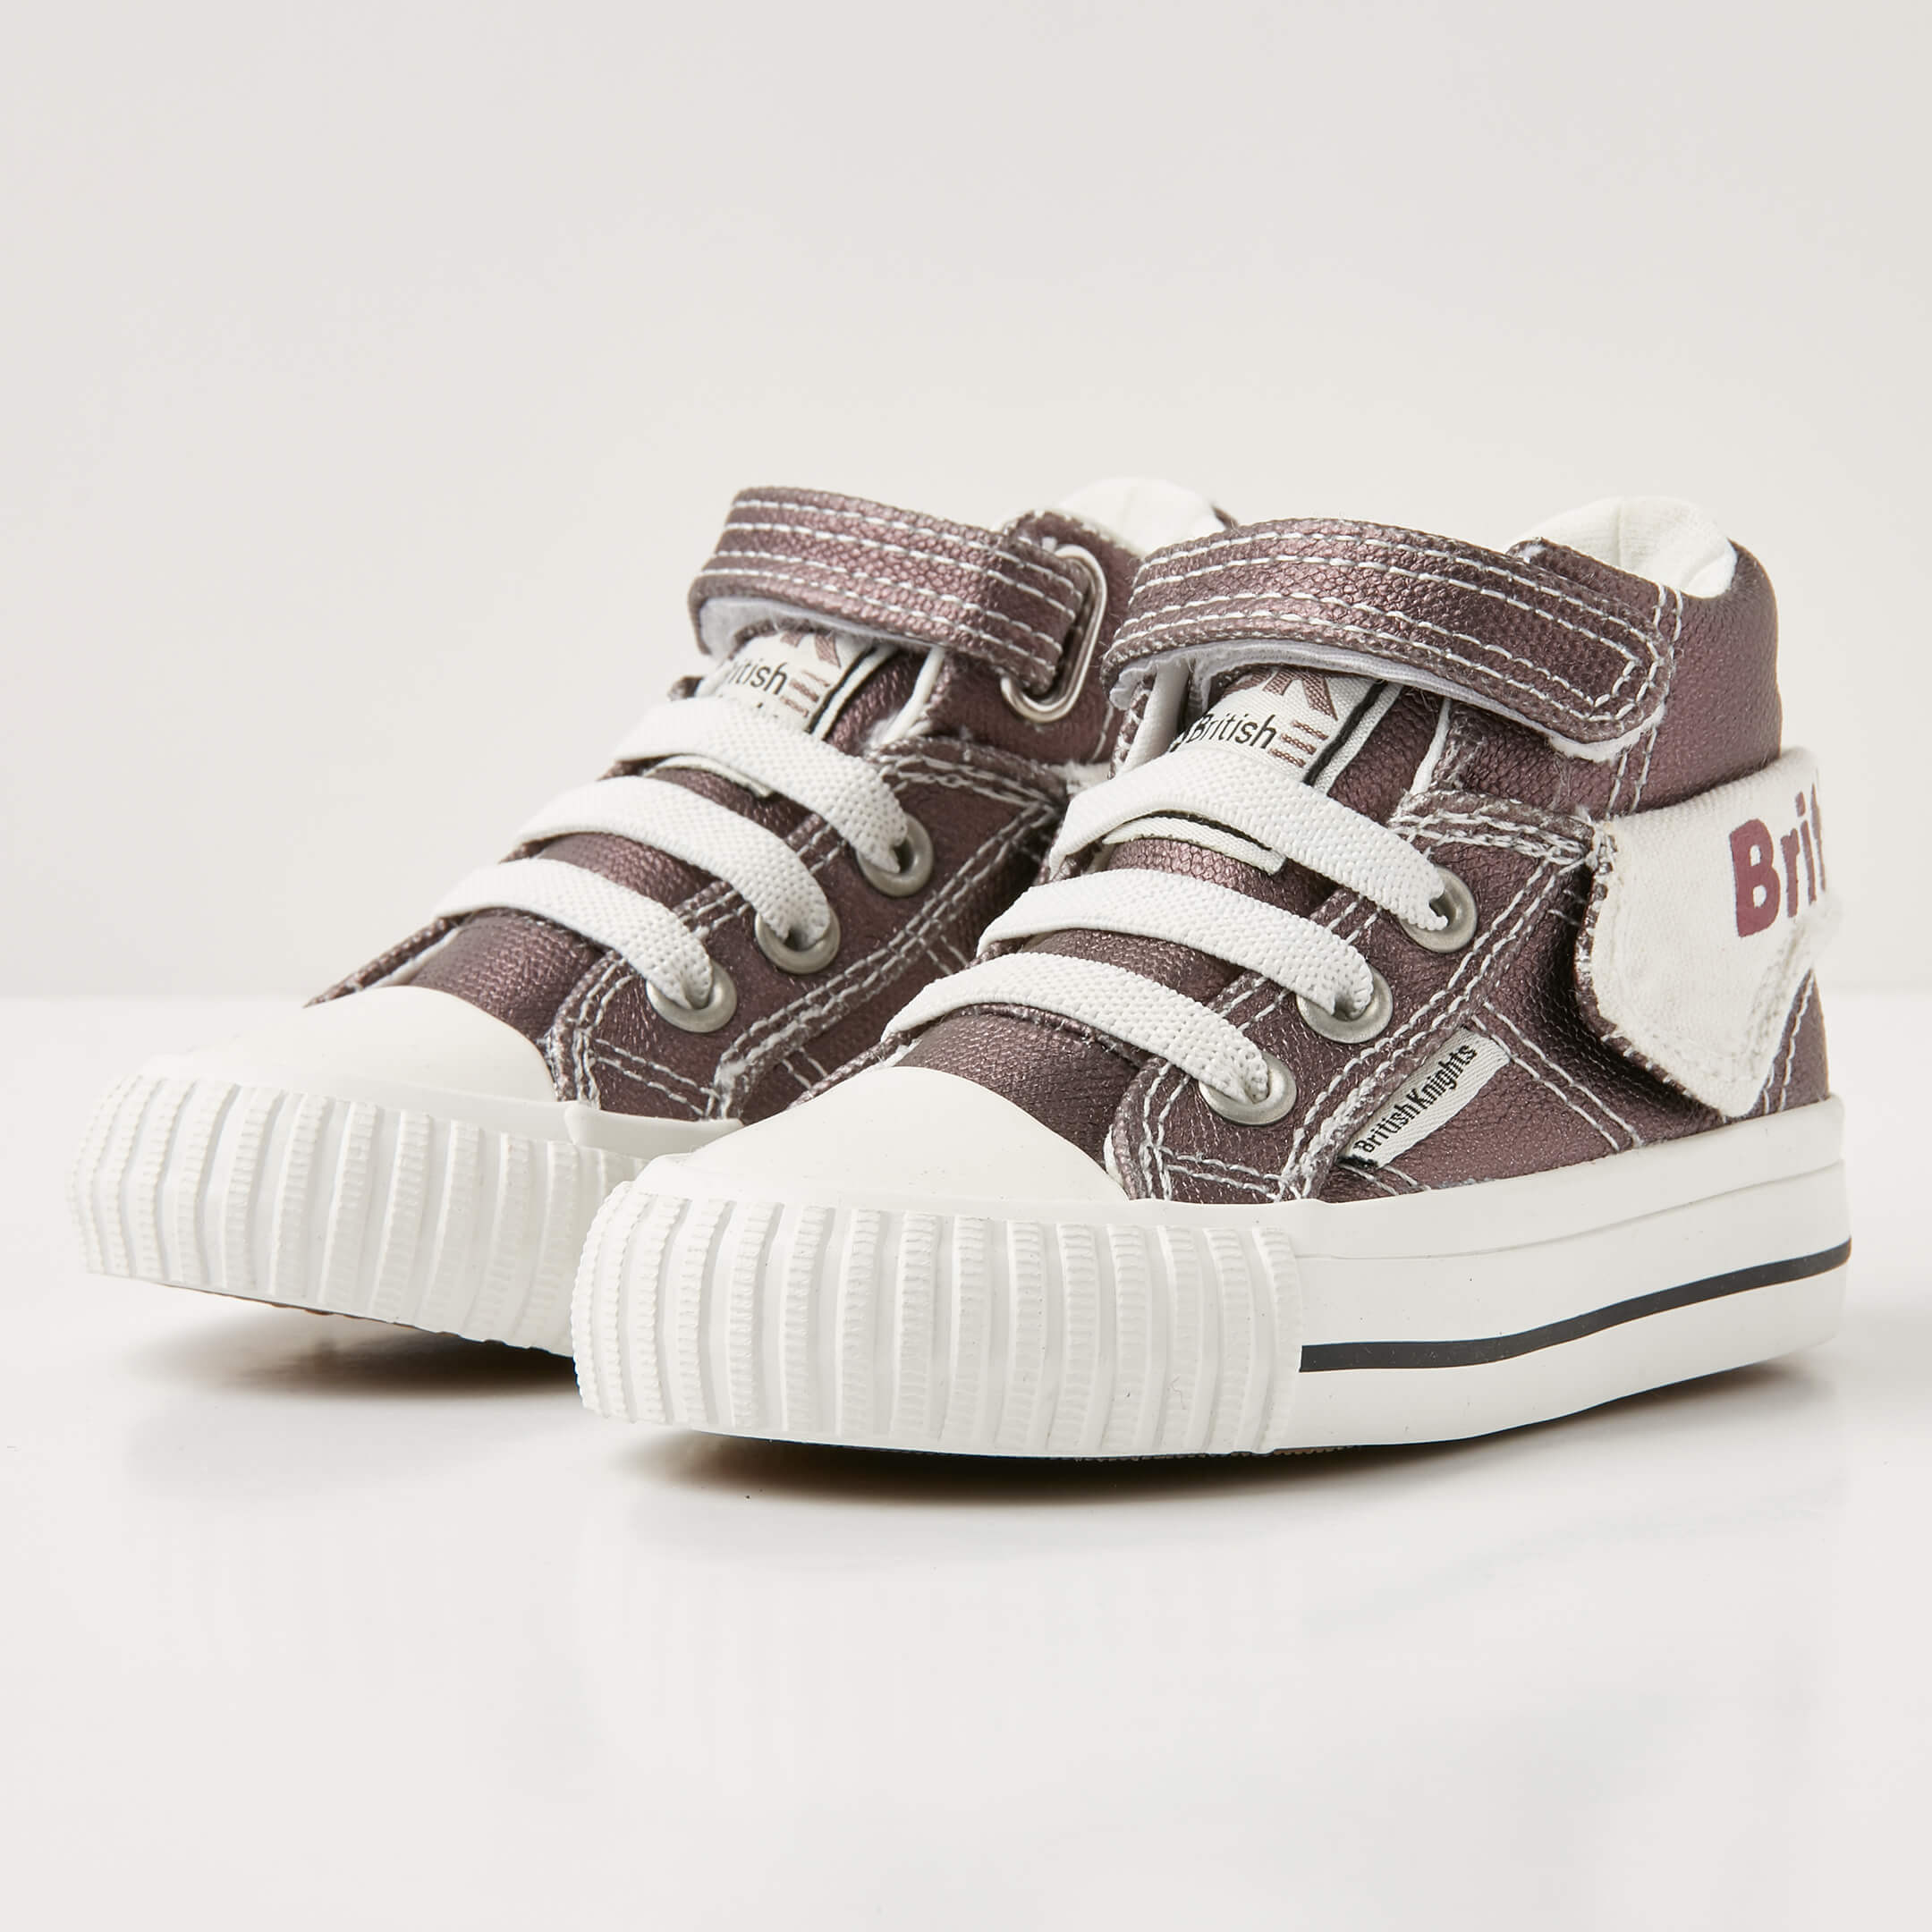 British Knights Sneaker Front view  B43-3706I-02 ROCO HIGH-TOP FEMALE